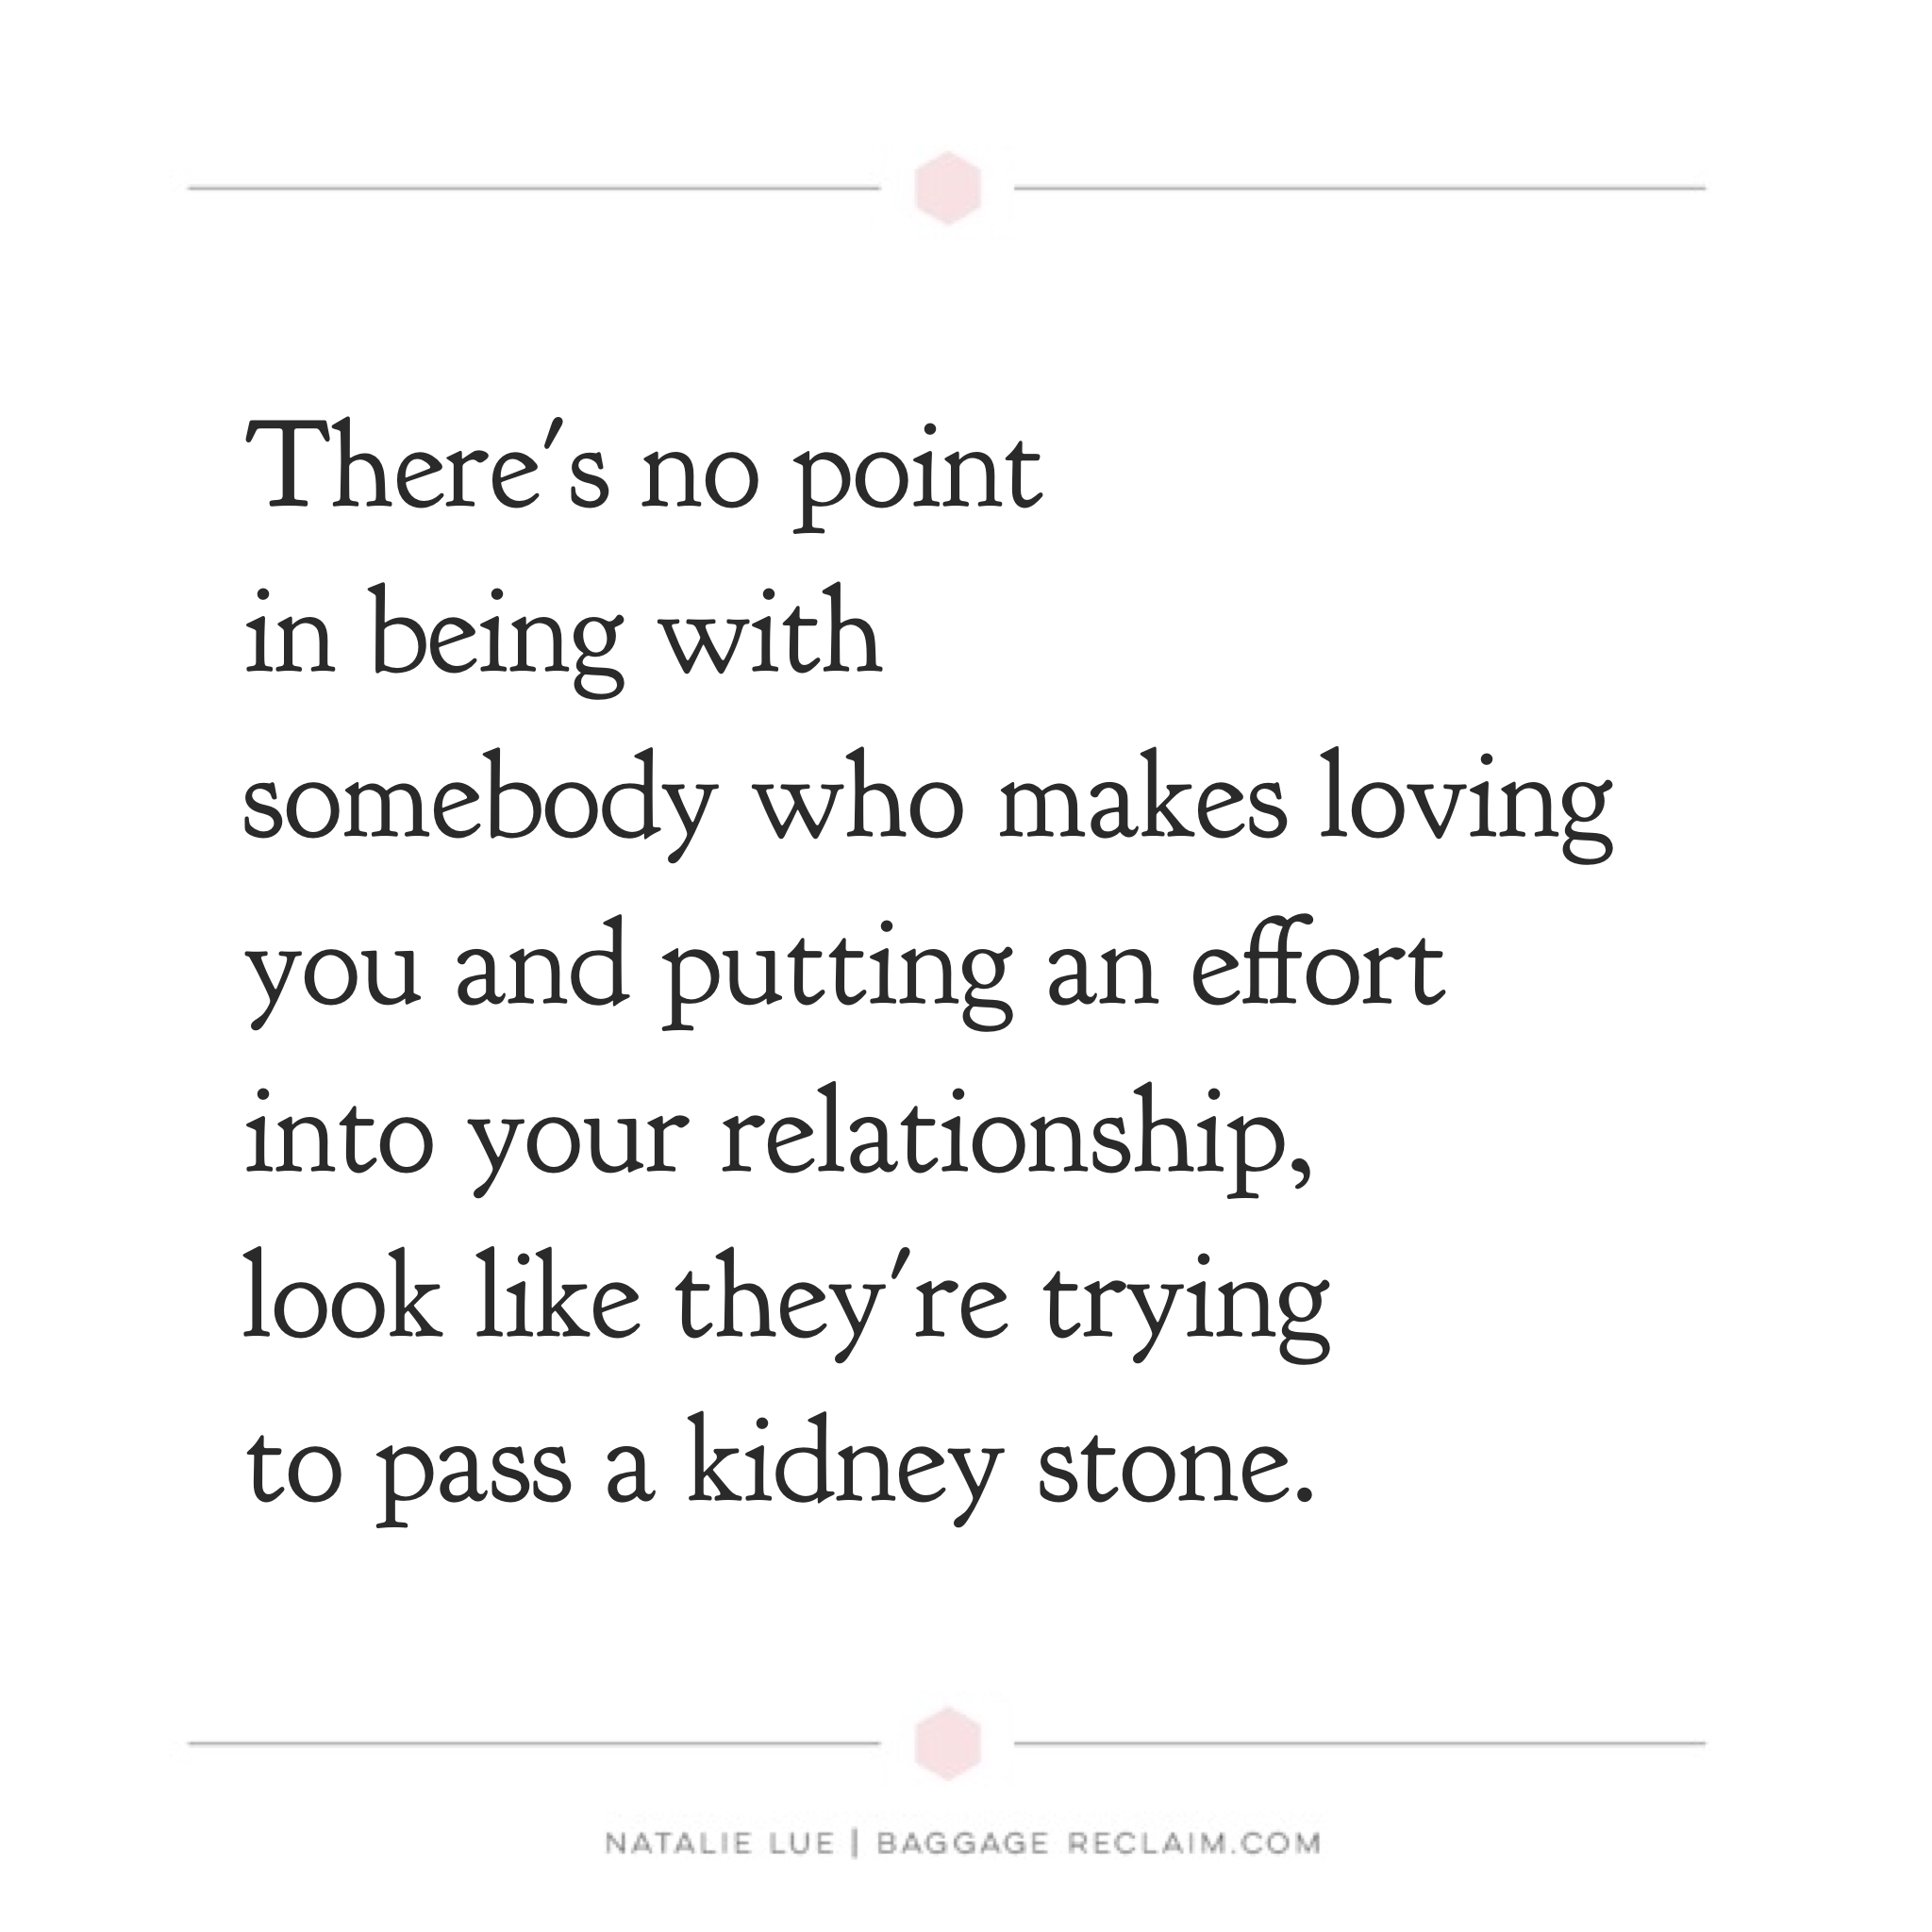 There's no point in being with somebody who makes loving you and putting an effort into your relationship, look like they're trying to pass a kidney stone.